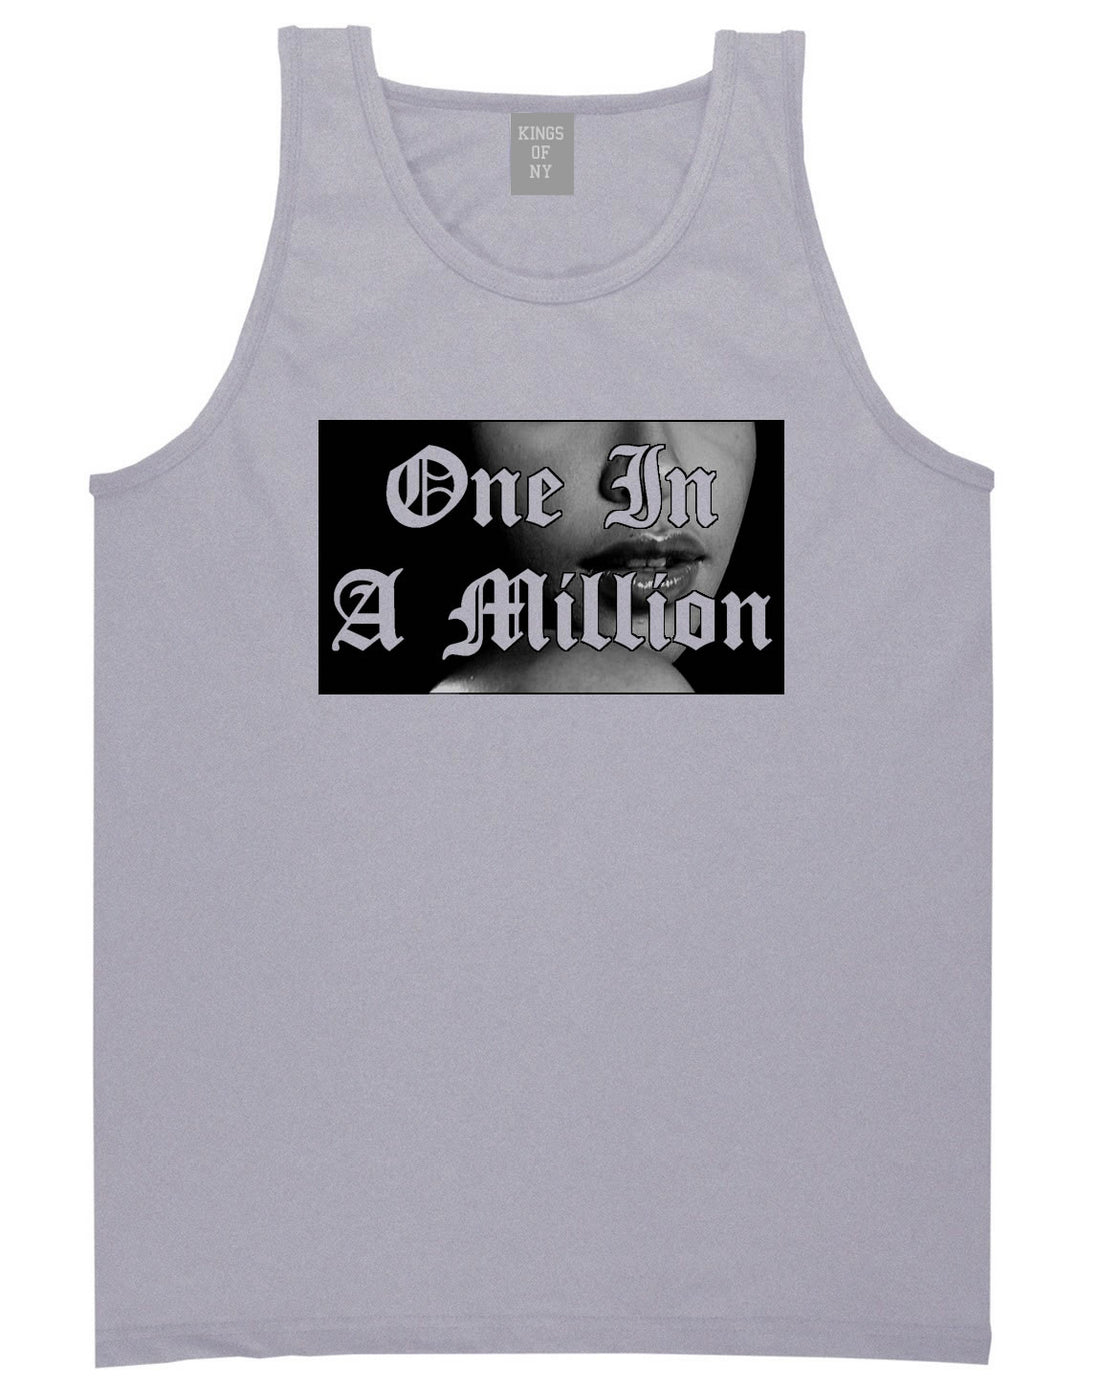 One in a Million Aaliyah Tank Top By Kings Of NY